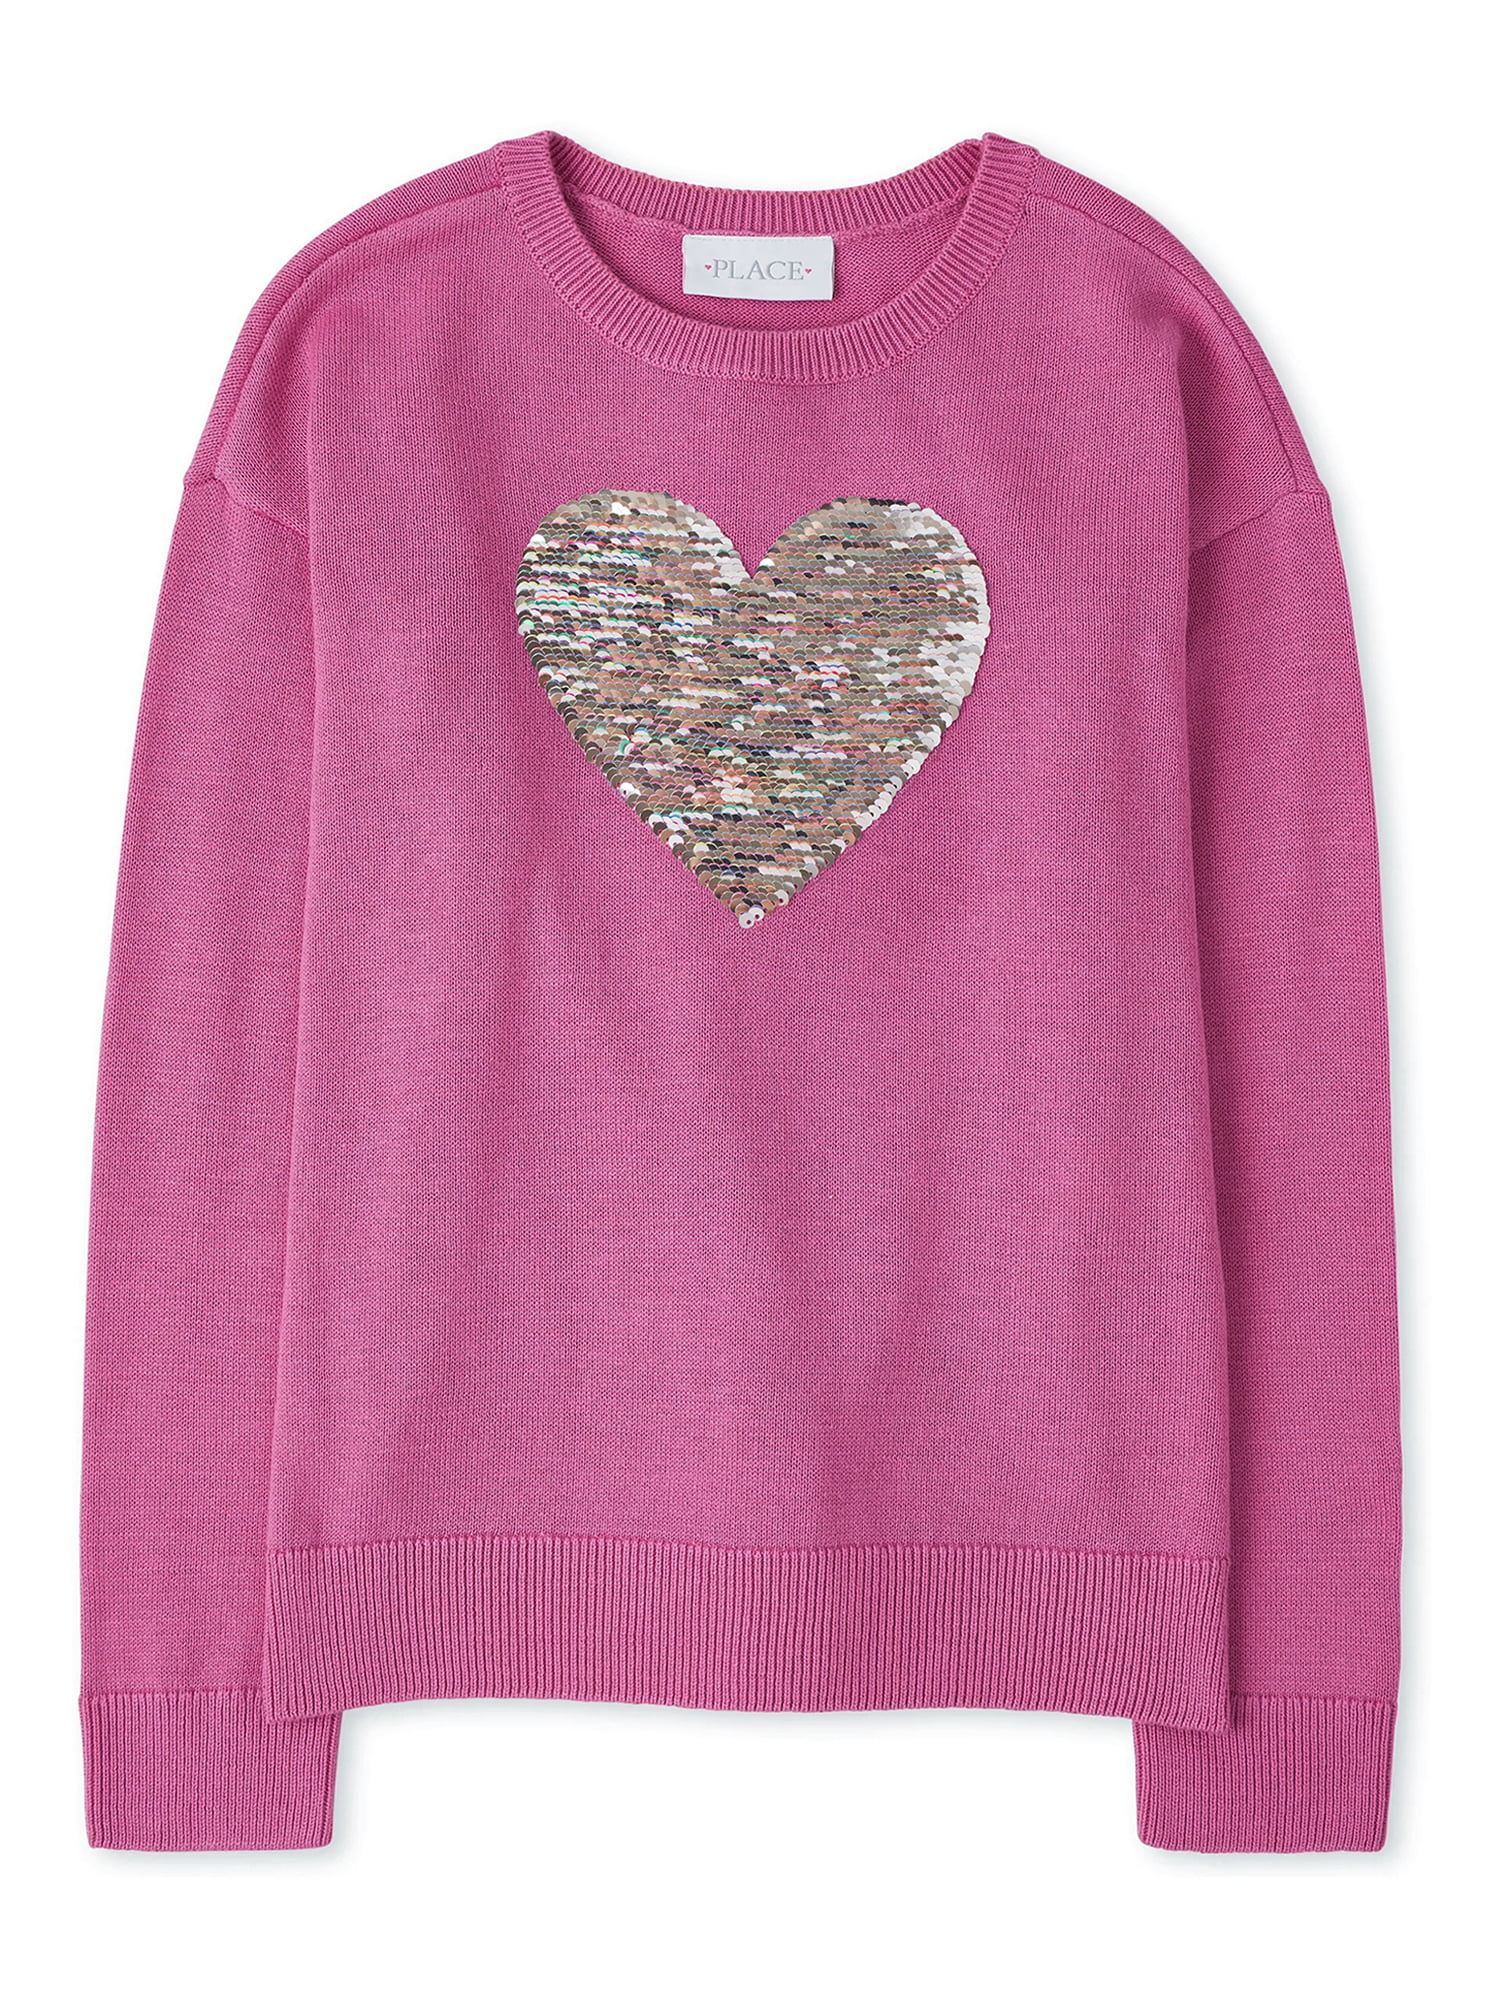 The Childrens Place Girls Big Graphic Sweater